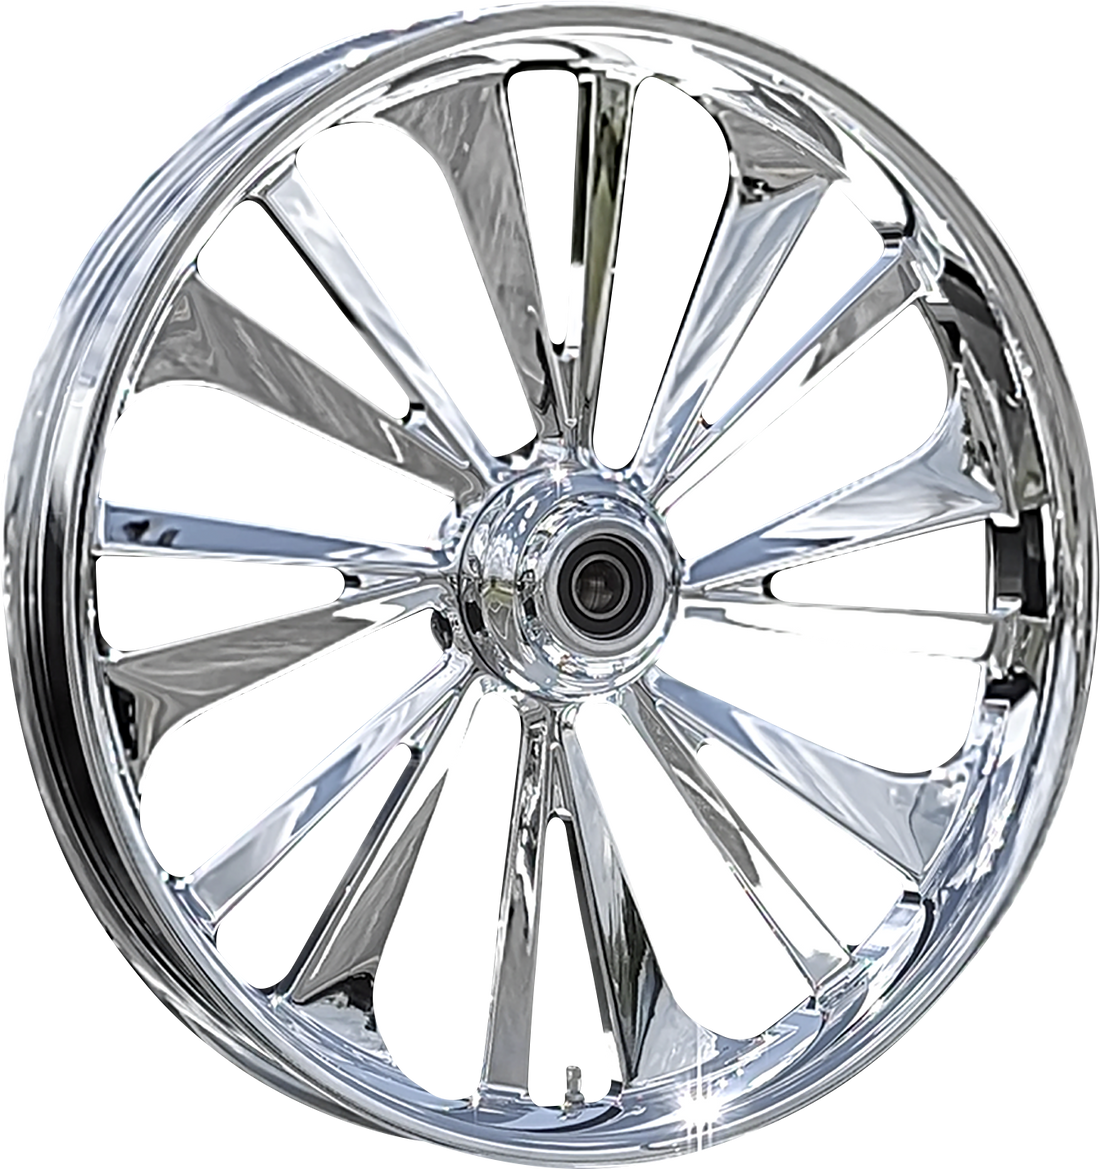 0213-0881 - RC COMPONENTS Wheel - Dillinger - Front - Single Disc - No ABS - Chrome - 21"x3.50" - FLH 213HD032NON138C